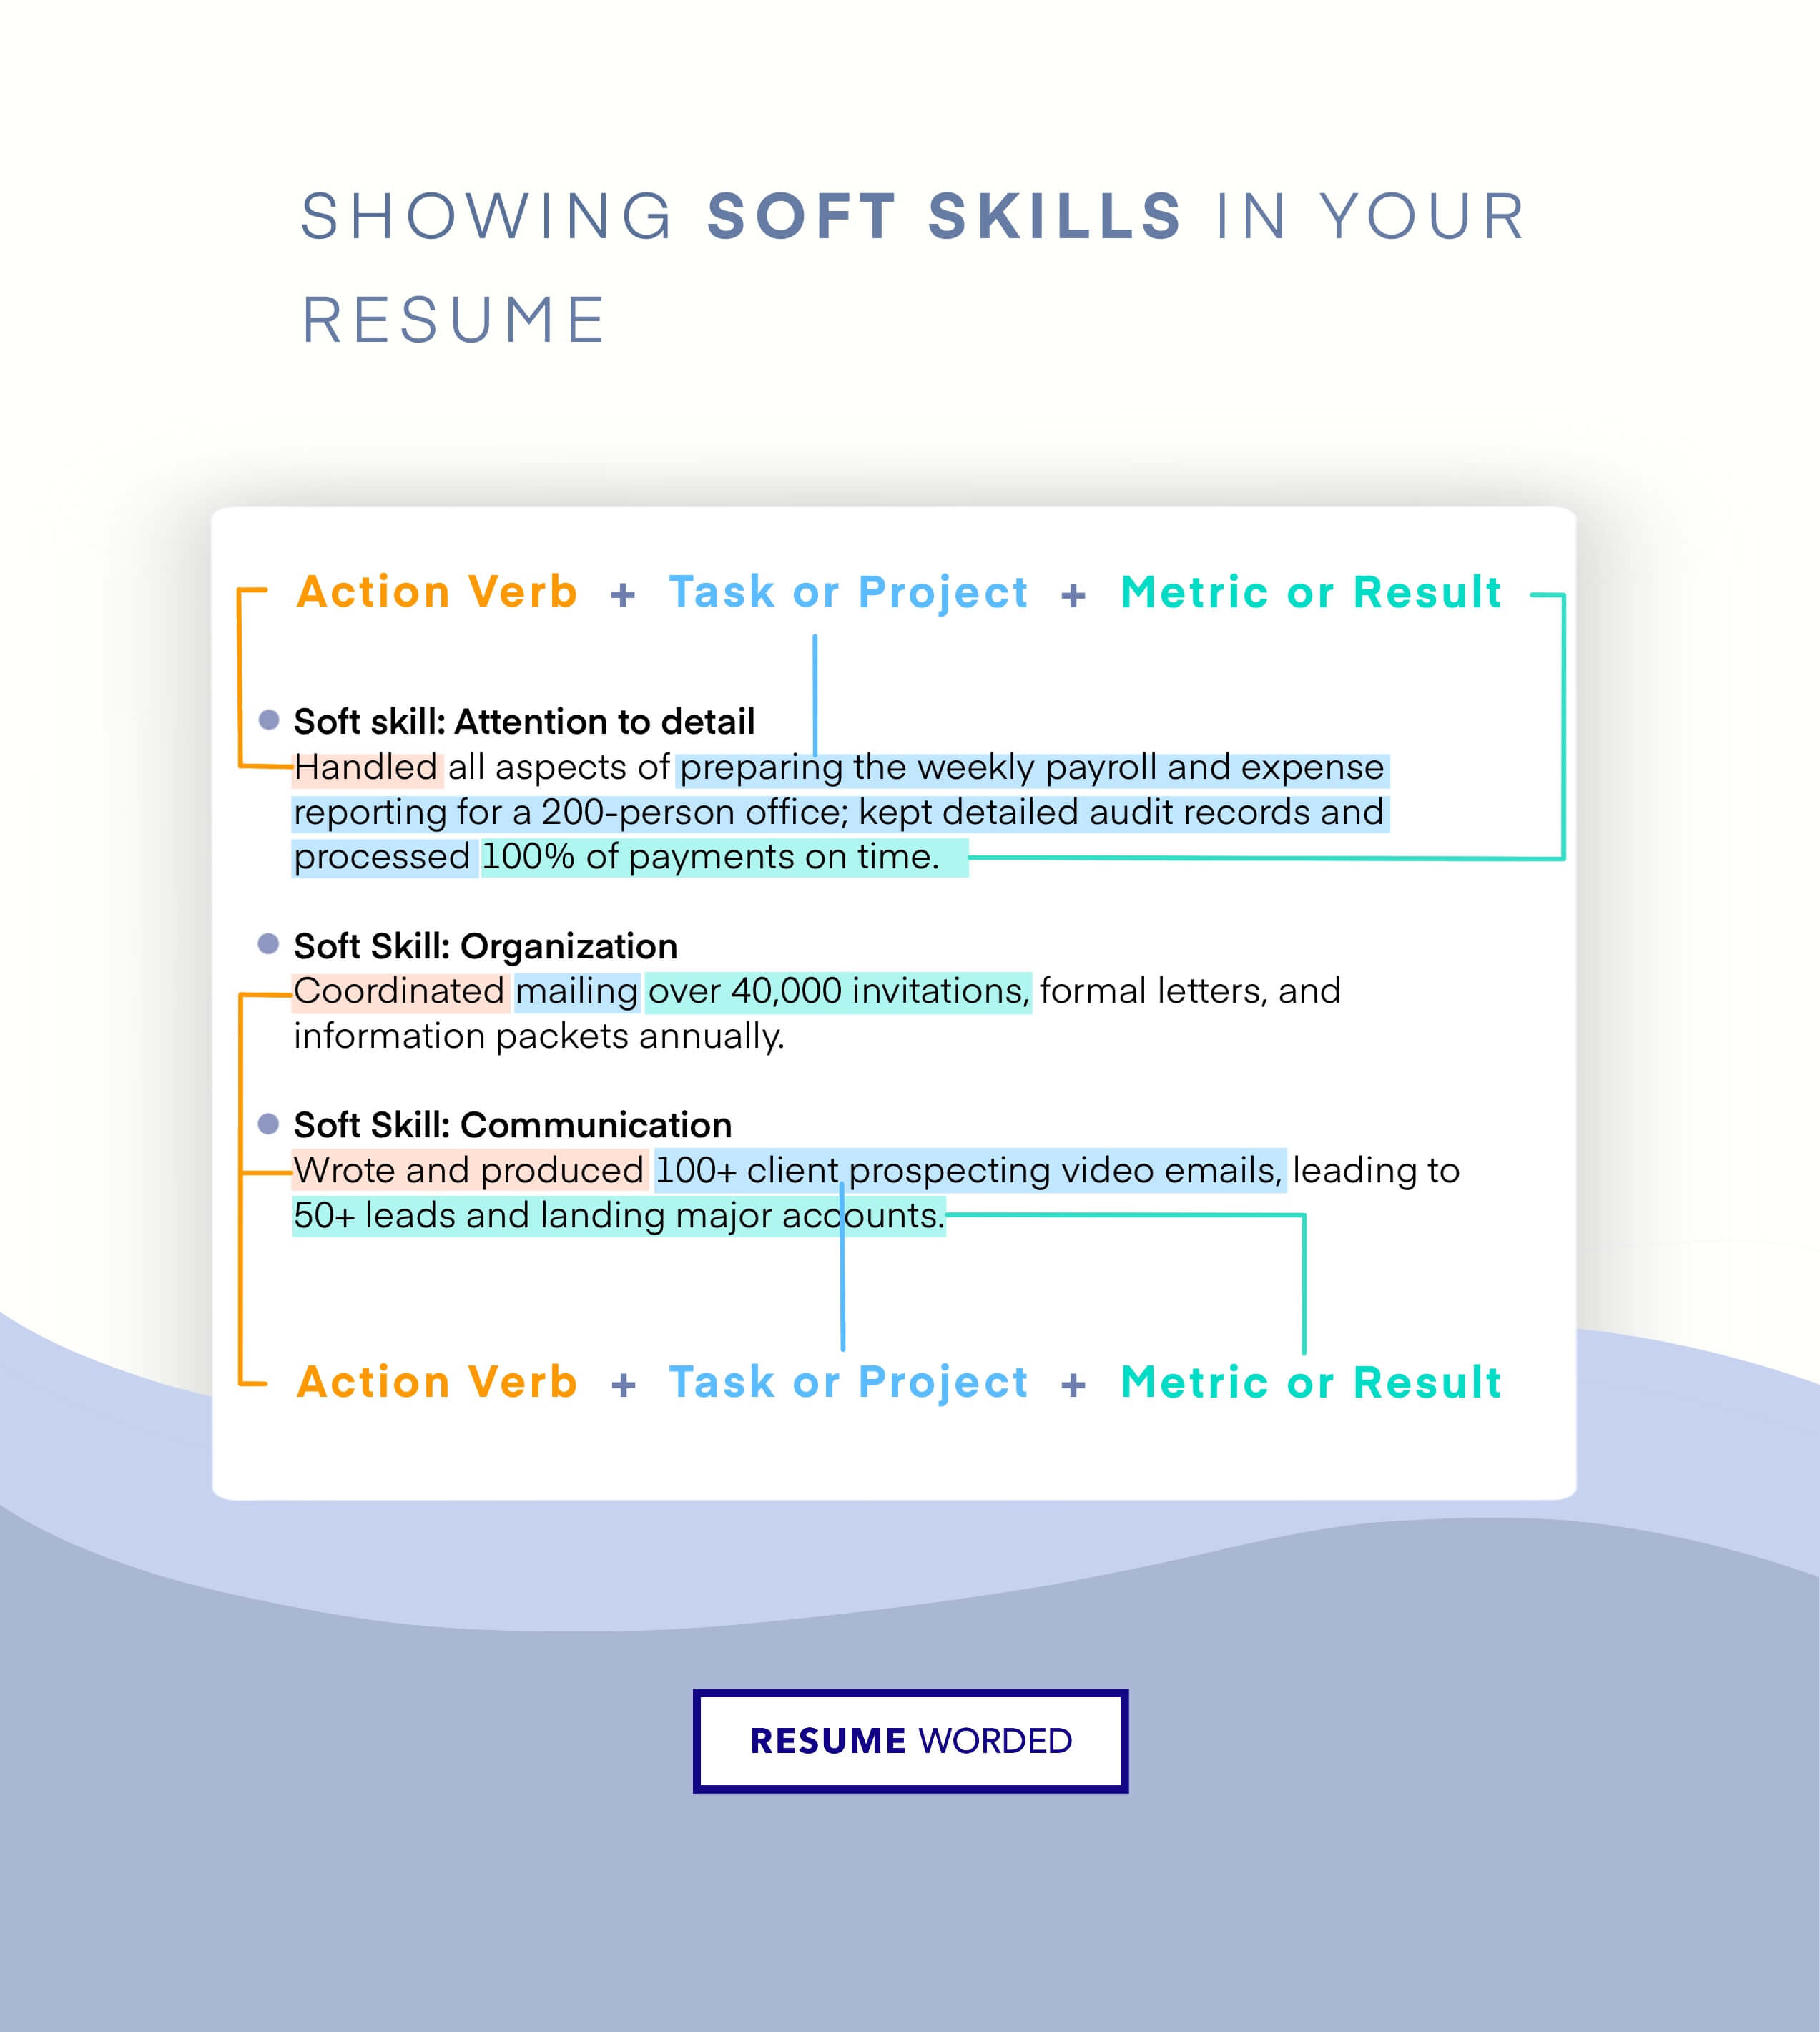 Showcase soft skills applicable to Scrum Masters - Entry Level Scrum Master CV